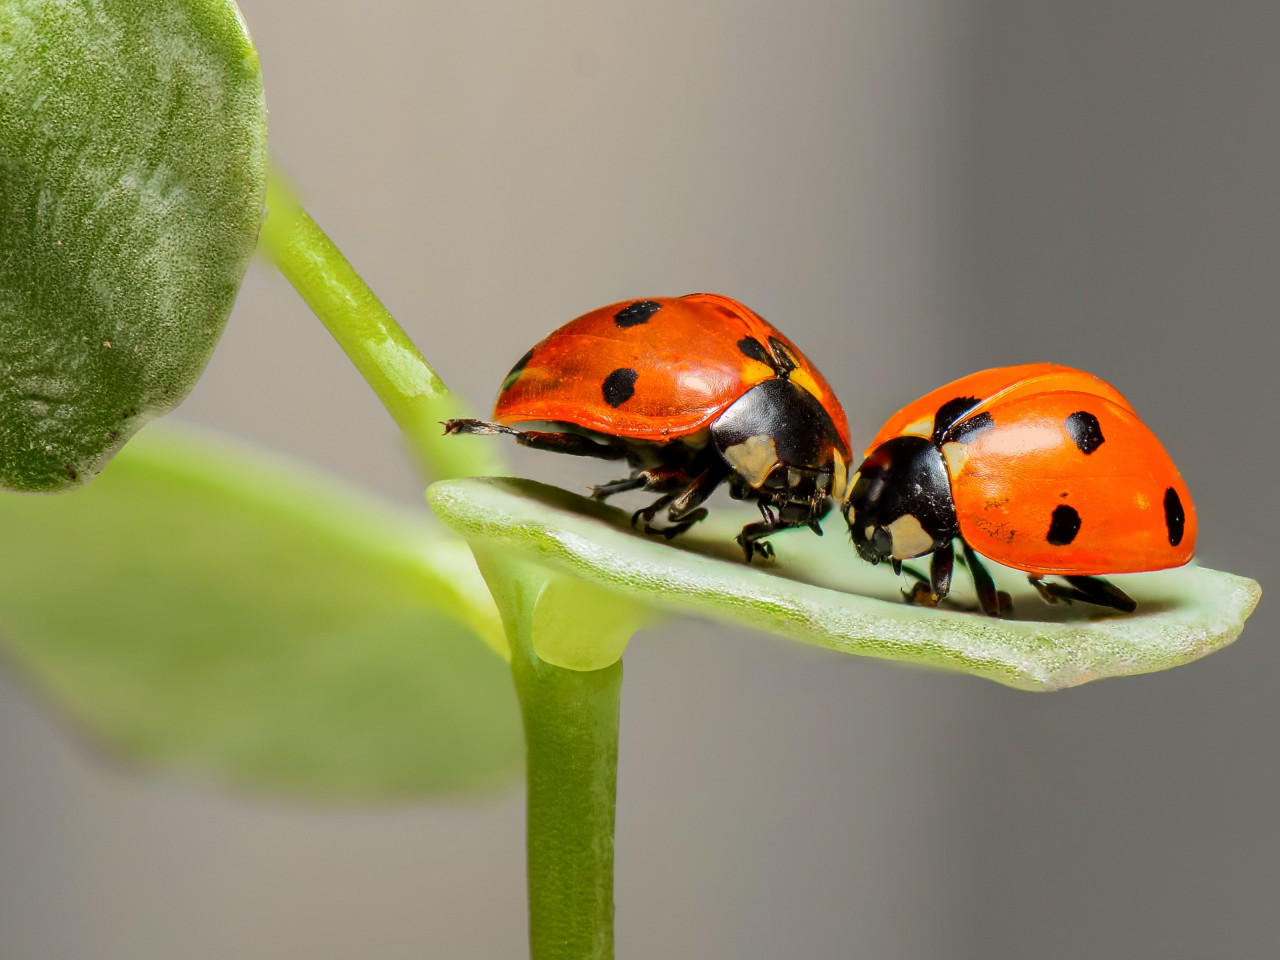 Ladybird, the insect wallpaper 1280x960